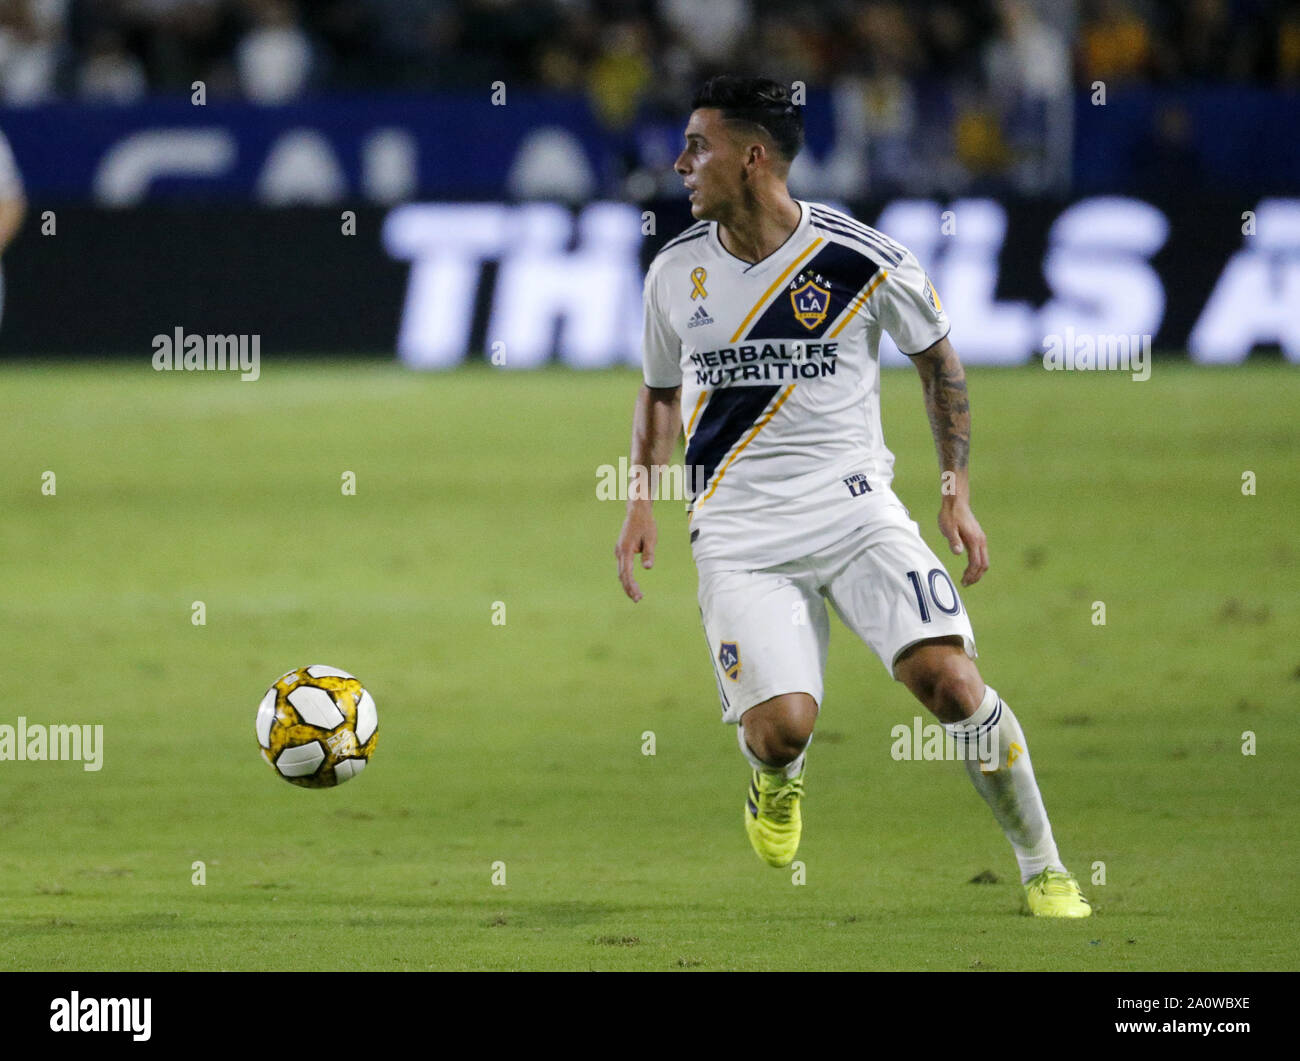 Los Angeles, California, USA. 21st Sep, 2019. LA Galaxy forward Cristian Pavon (10) controls the ball during the 2019 Major League Soccer (MLS) match between LA Galaxy and Montreal Impact in Carson, California, September 21, 2019. Credit: Ringo Chiu/ZUMA Wire/Alamy Live News Stock Photo